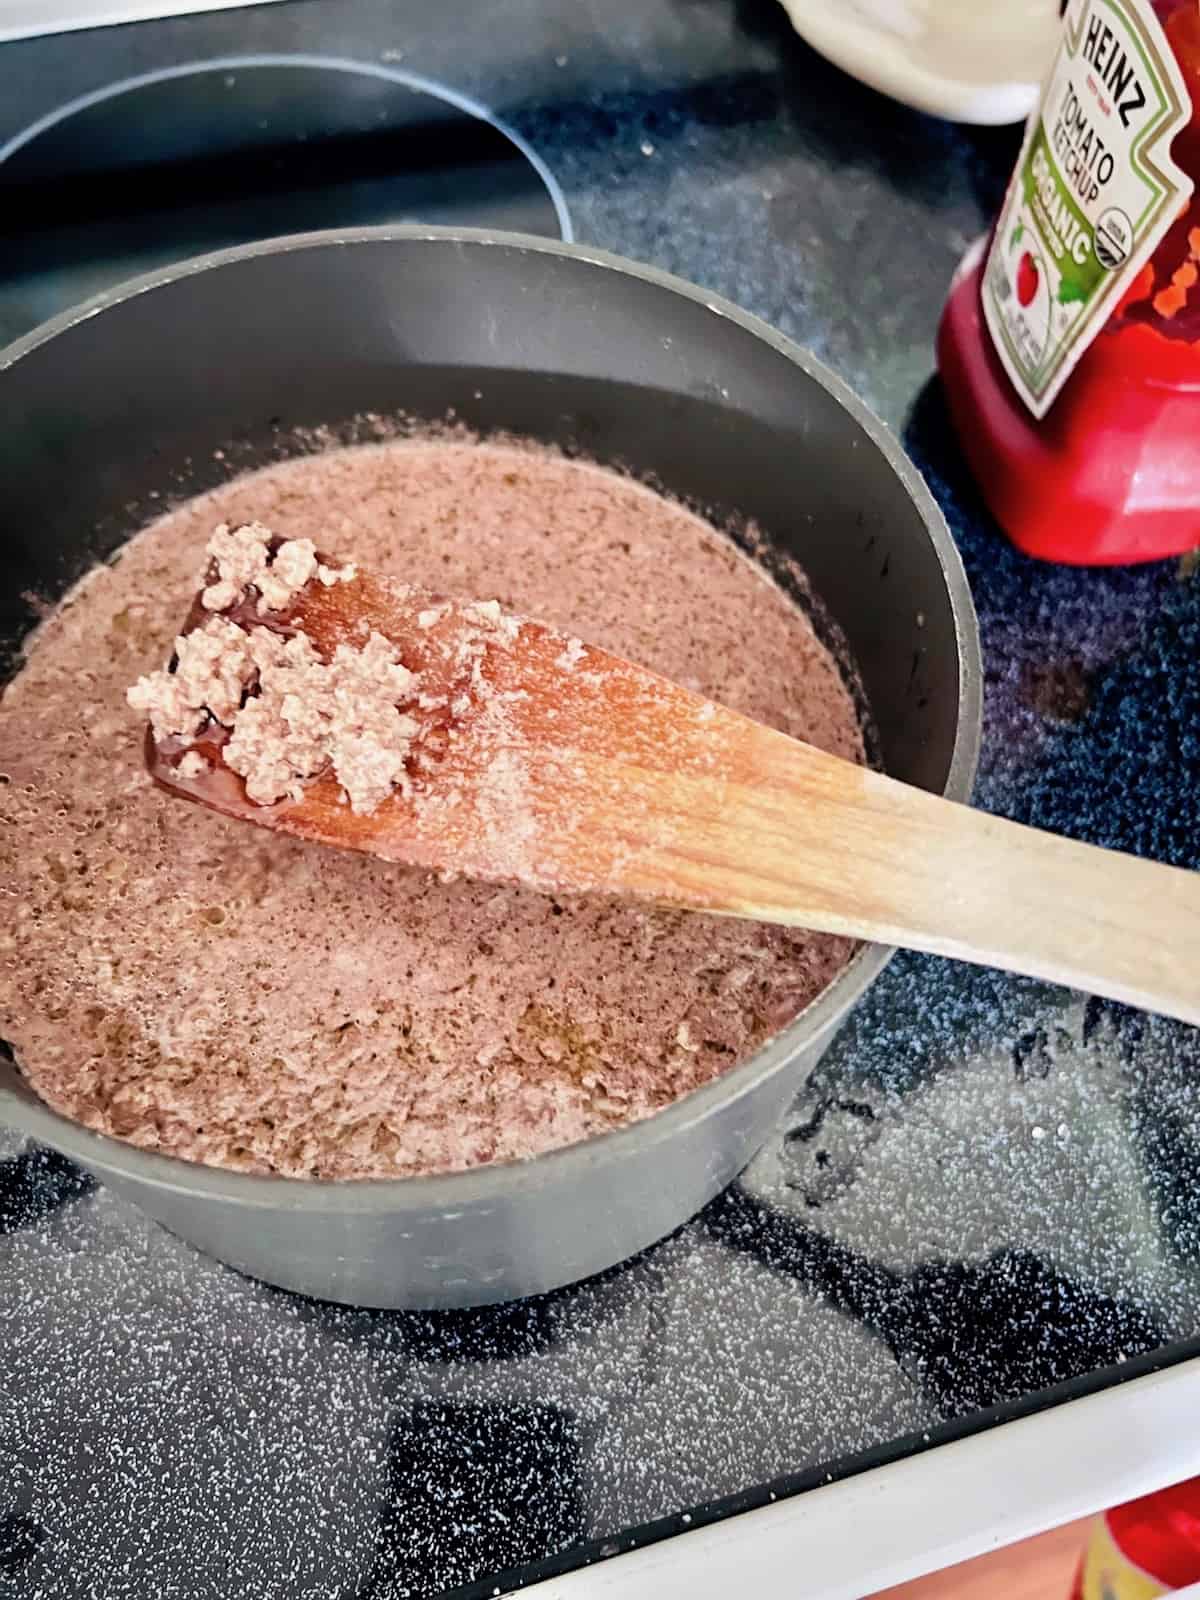 Ground beef done boiling in a pot with fine pieces on a wooden spoon.